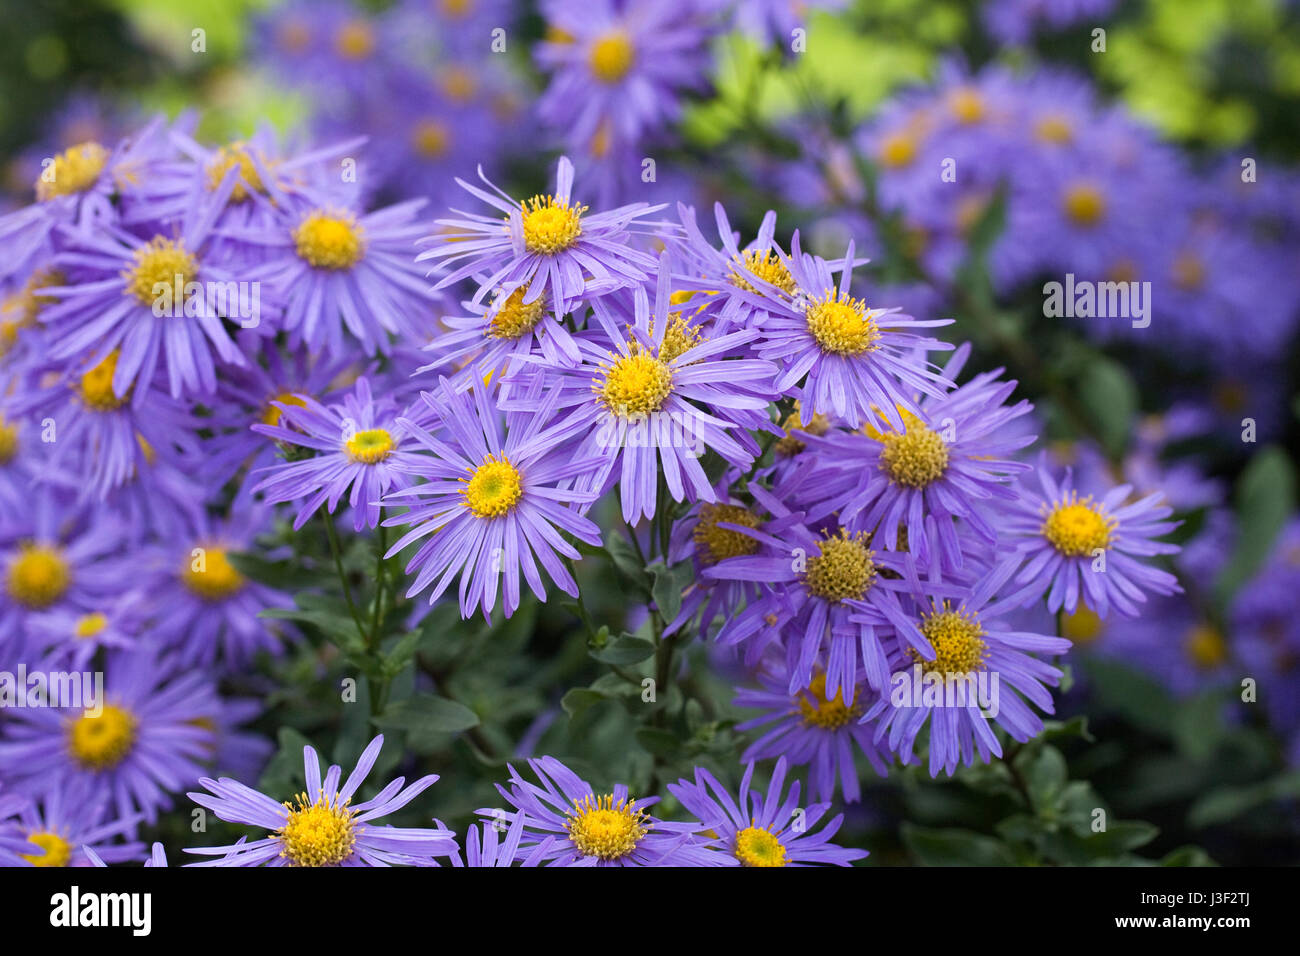 Aster amelius 'King George' flowers in Autumn. Stock Photo